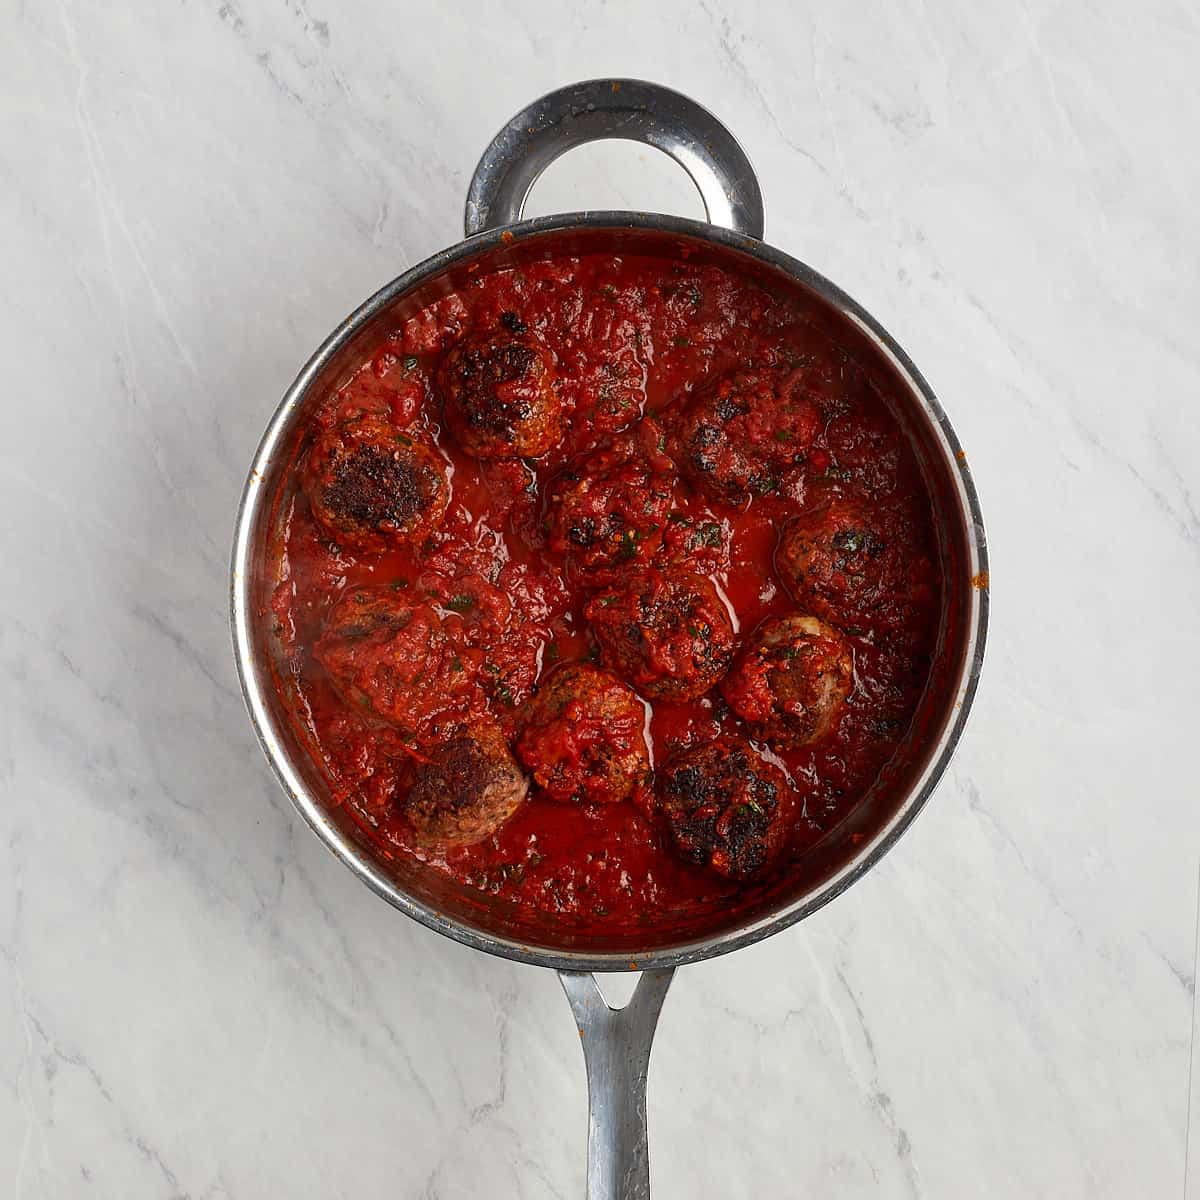 cooked meatballs in the skillet with the tomato sauce.